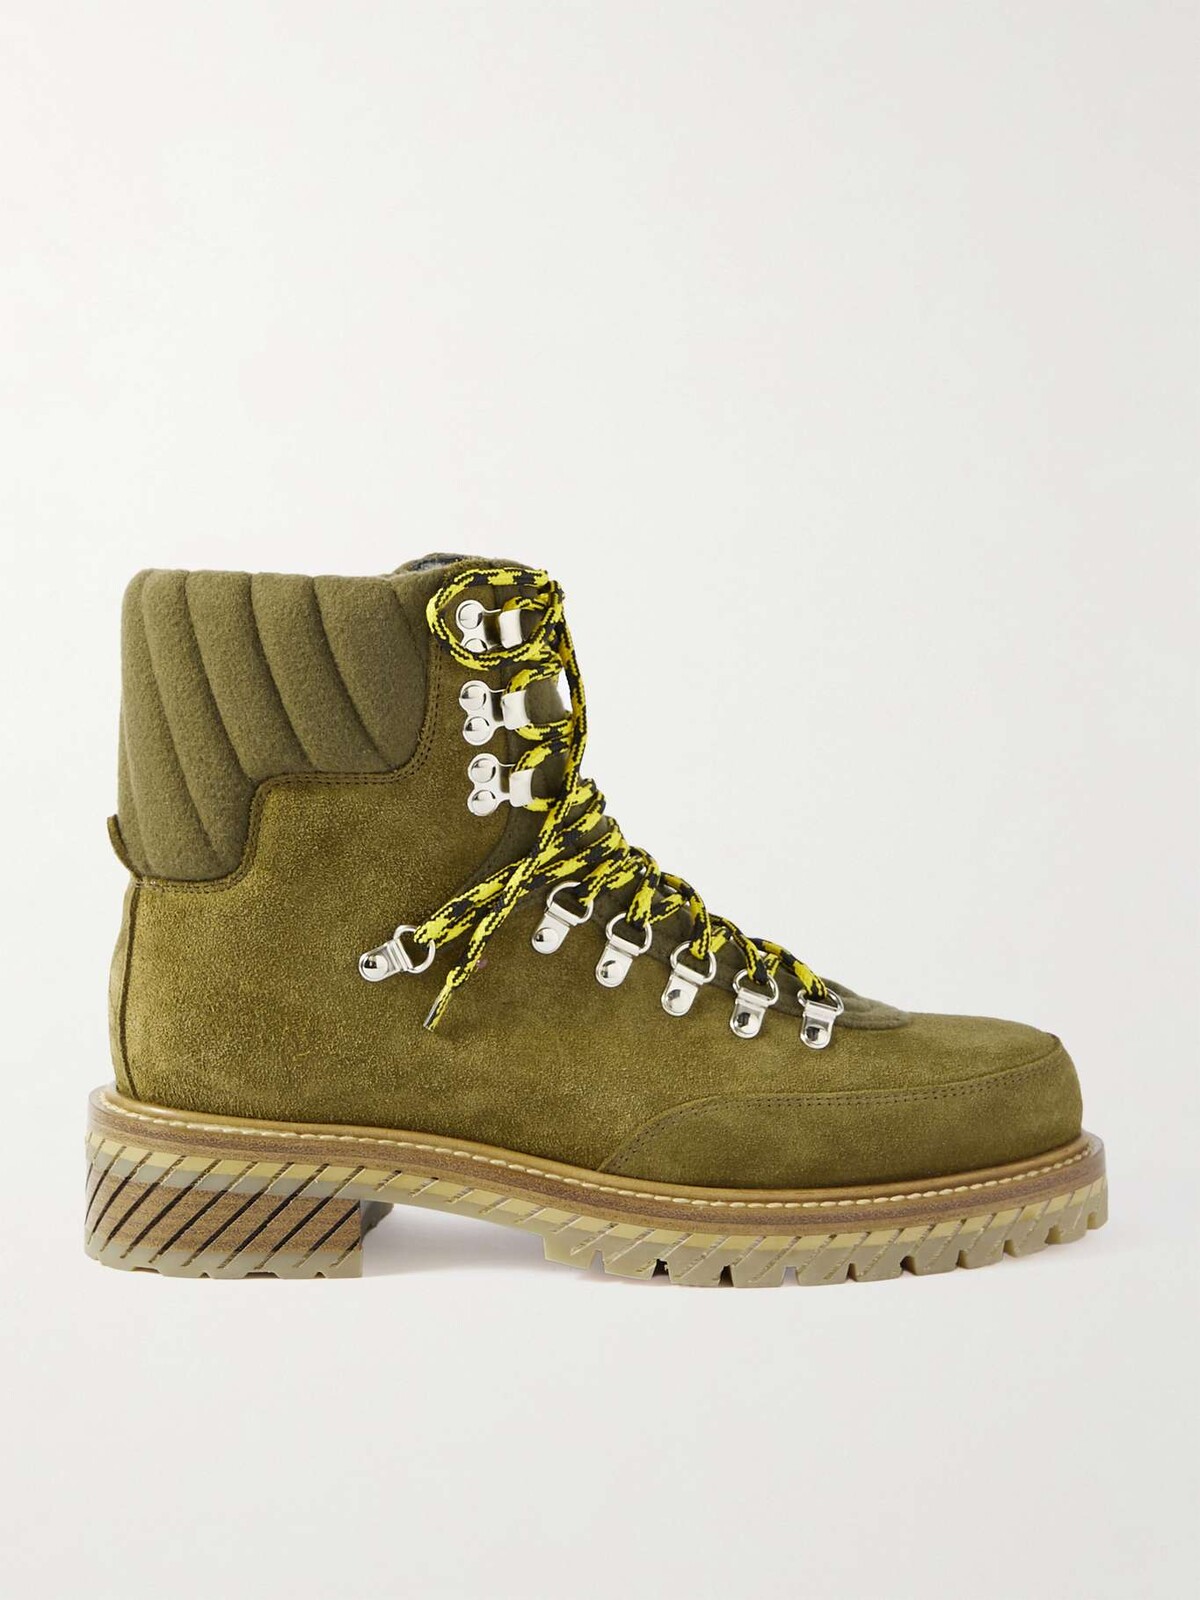 Off-White™ Gstaad Boots